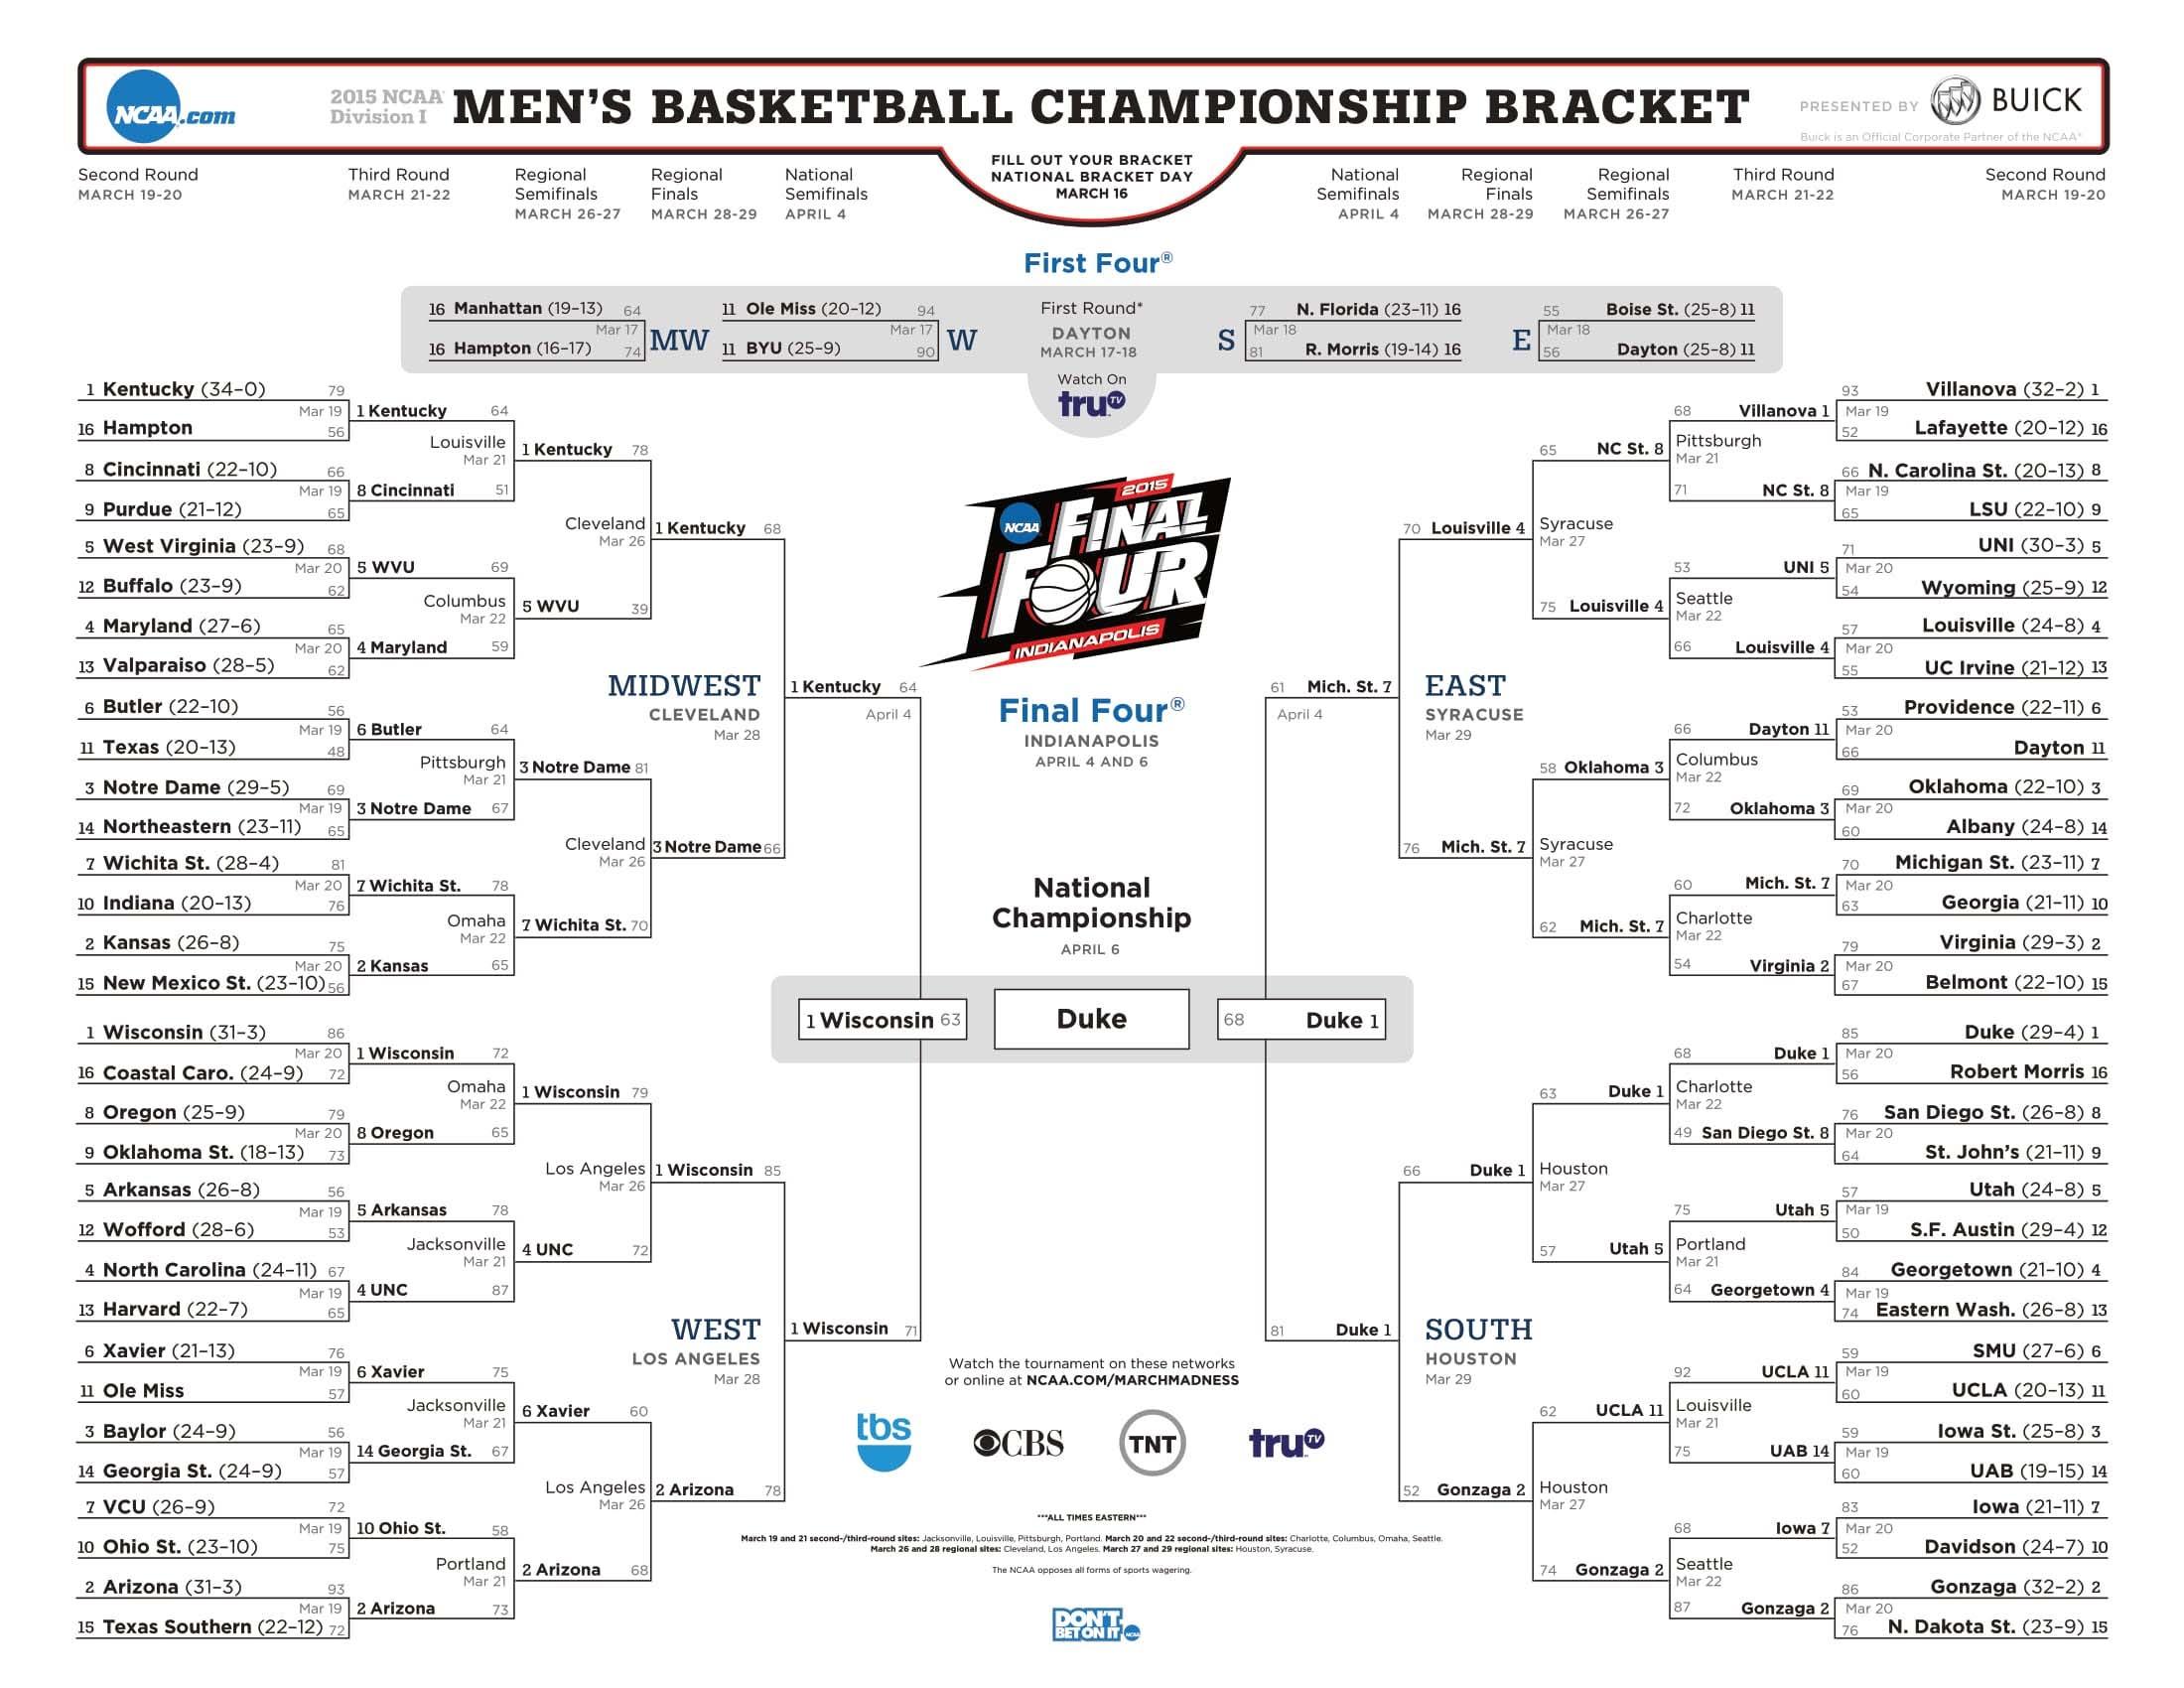 Here is a printable version of the 2015 NCAA tournament bracket.